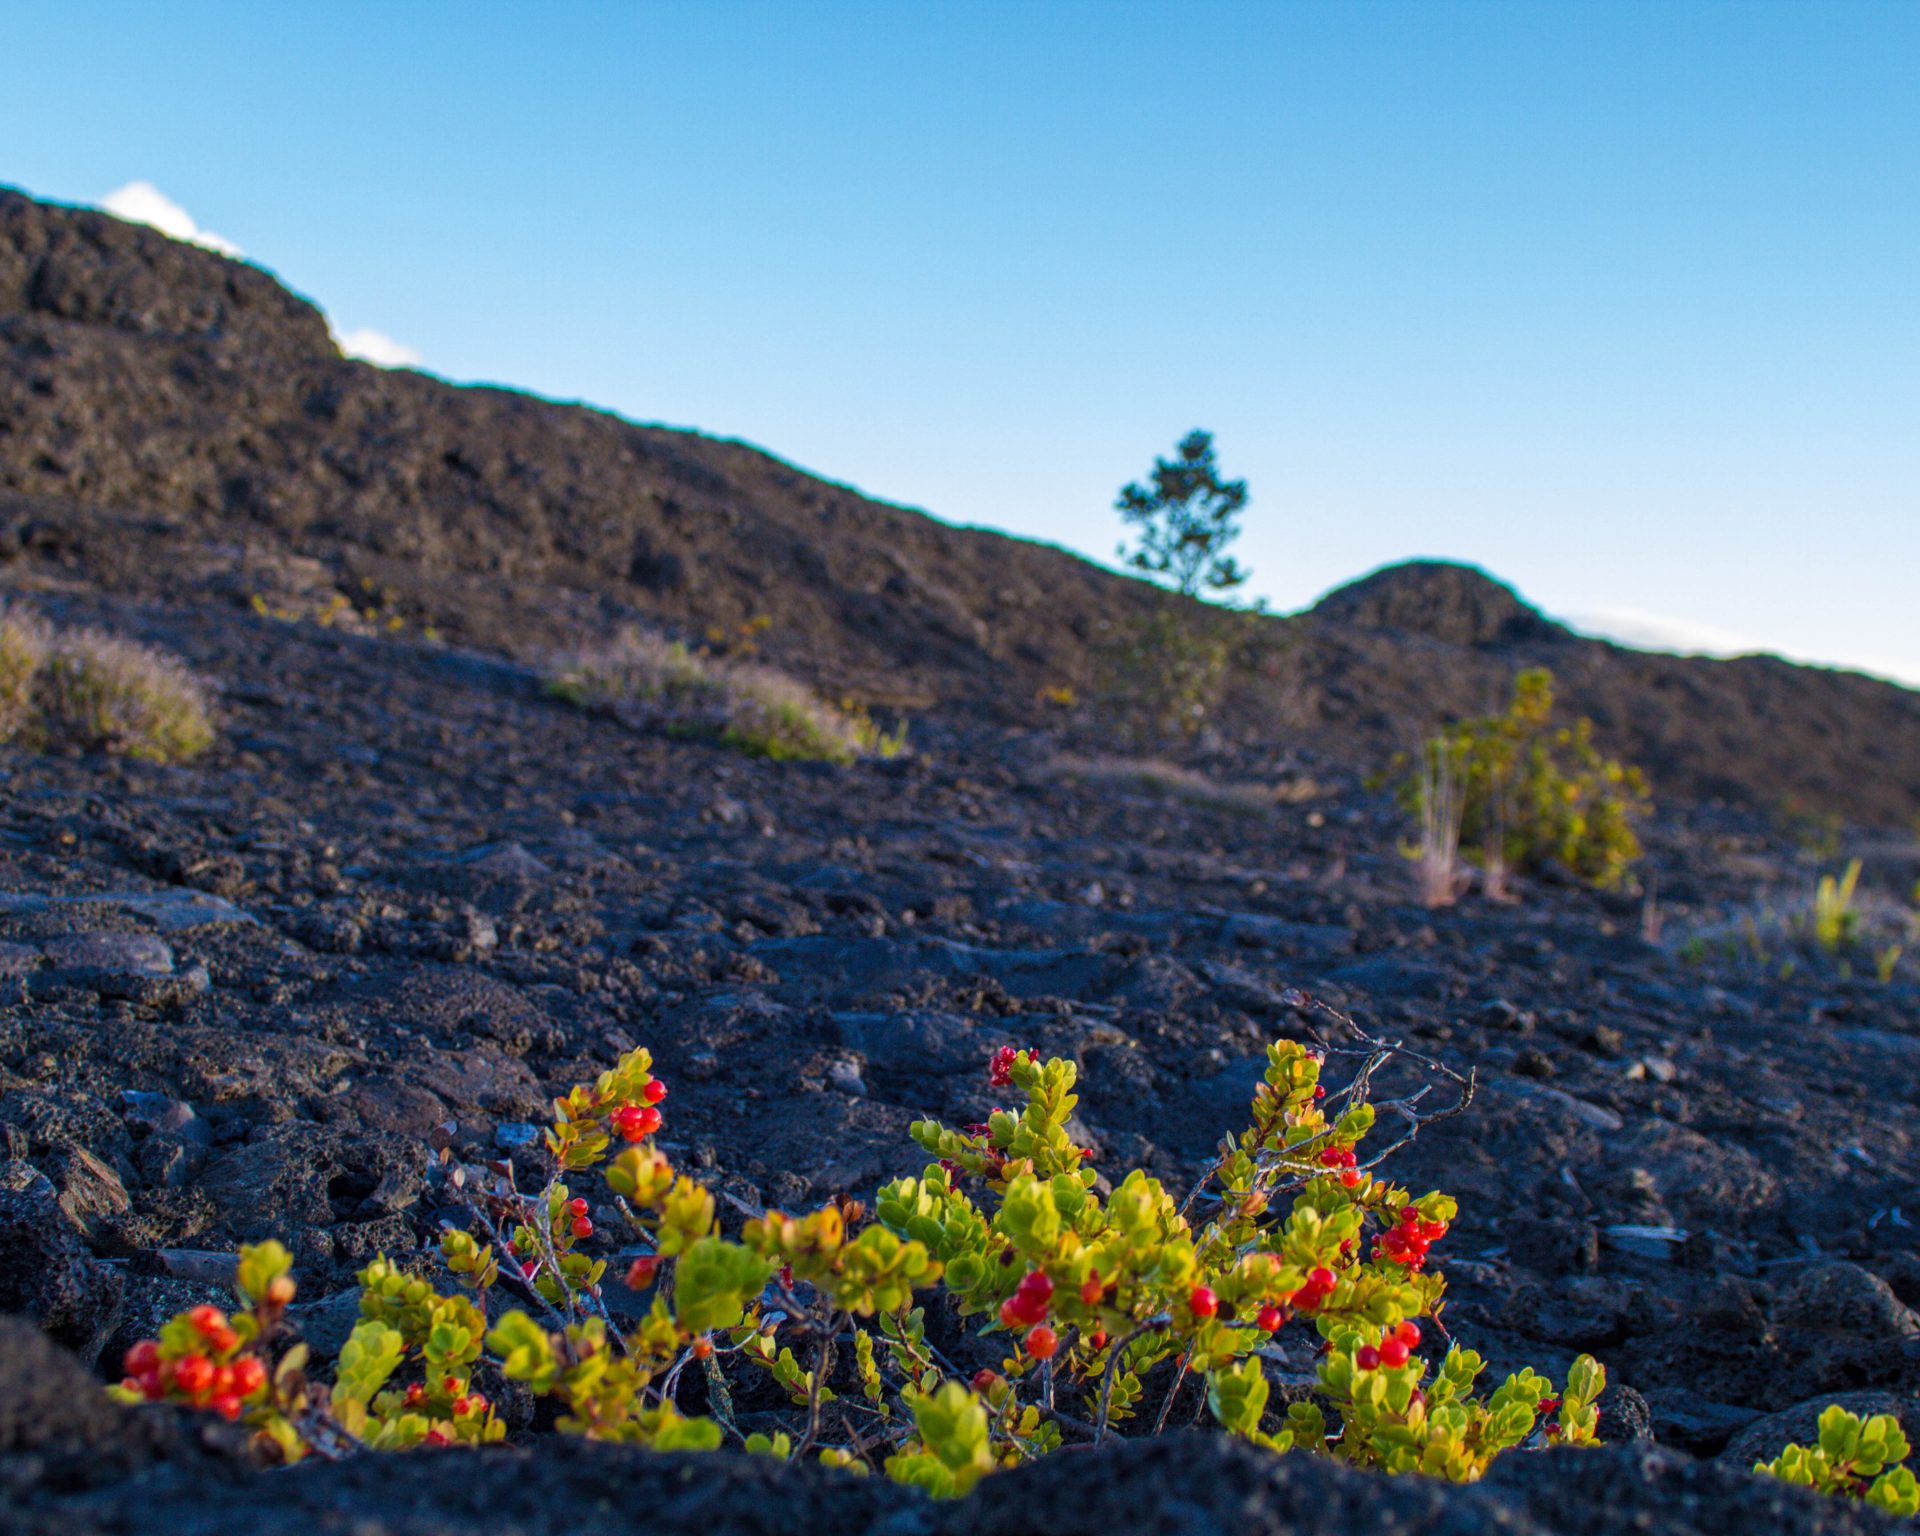 Flowers growing among the lava in Hawaii Volcanoes National Park.